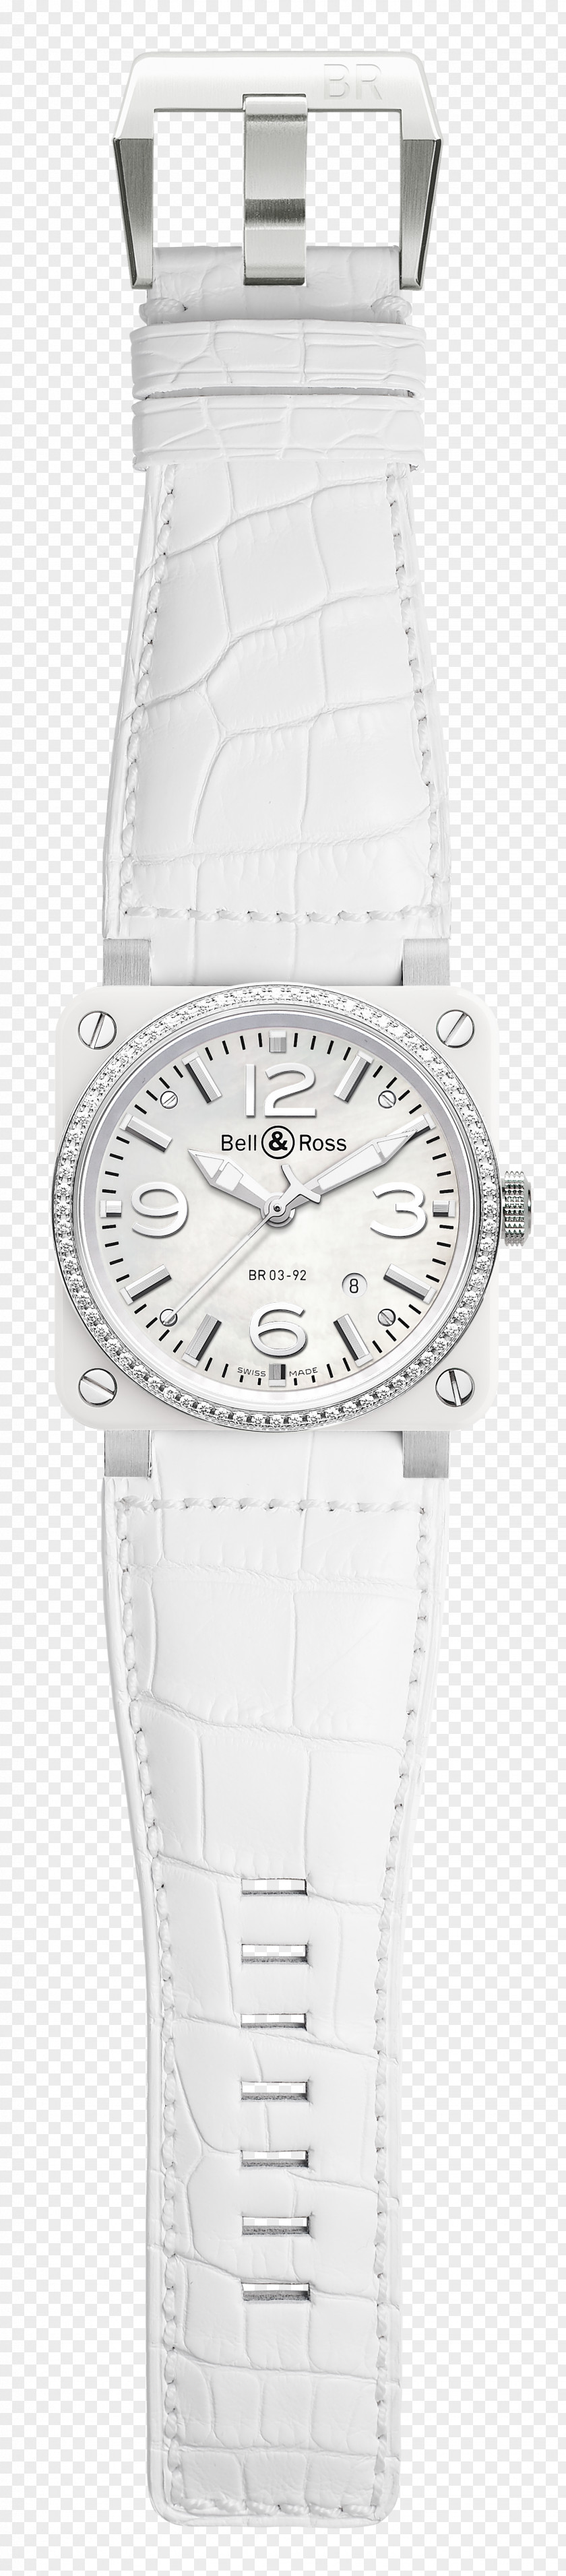 Ceramic Watch Strap Bell & Ross PNG